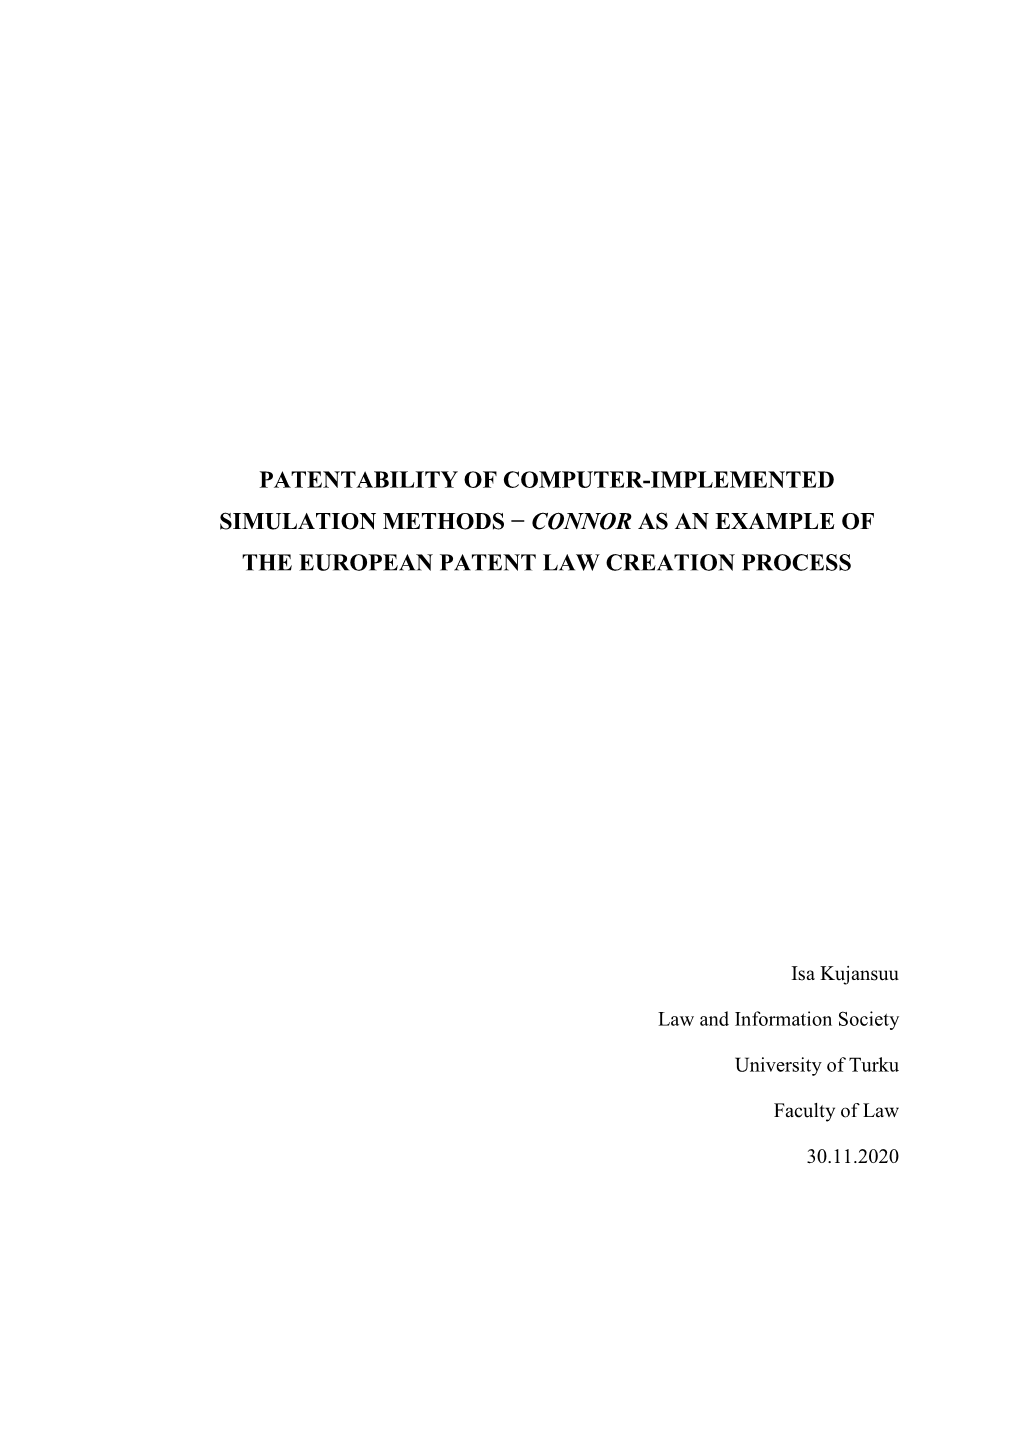 Patentability of Computer-Implemented Simulation Methods − Connor As an Example of the European Patent Law Creation Process